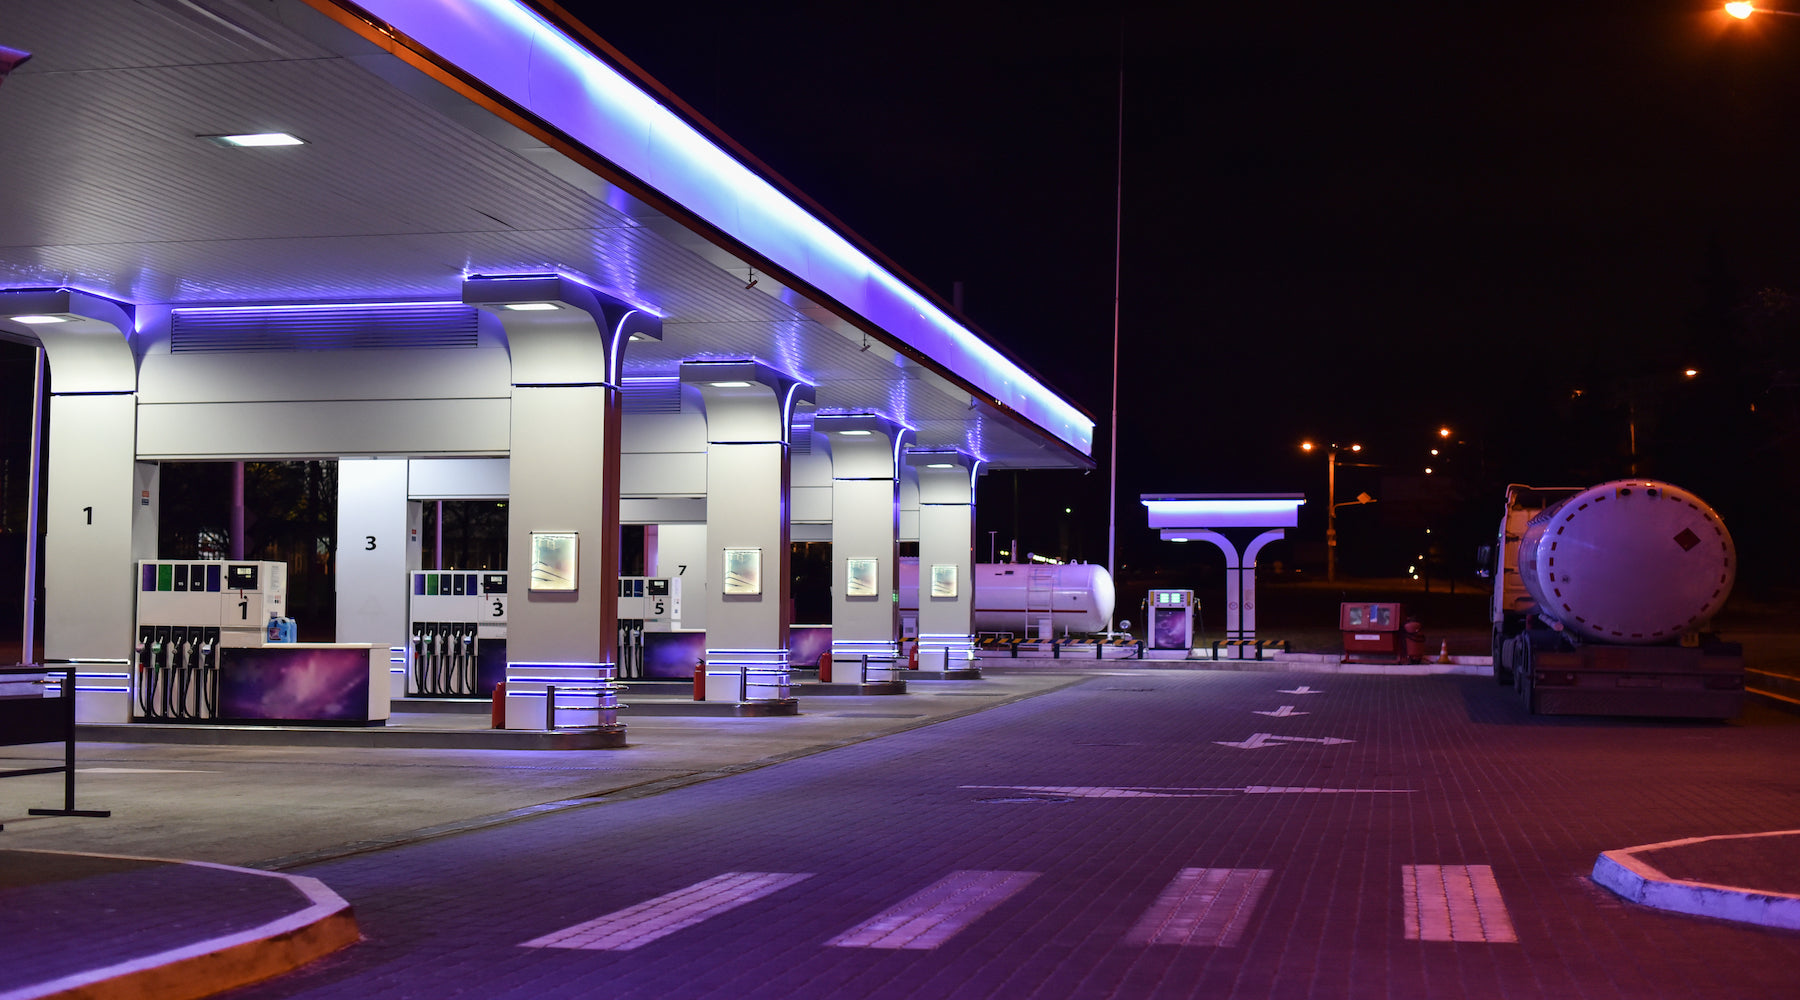 Canopy lights installed in a gas station canopy